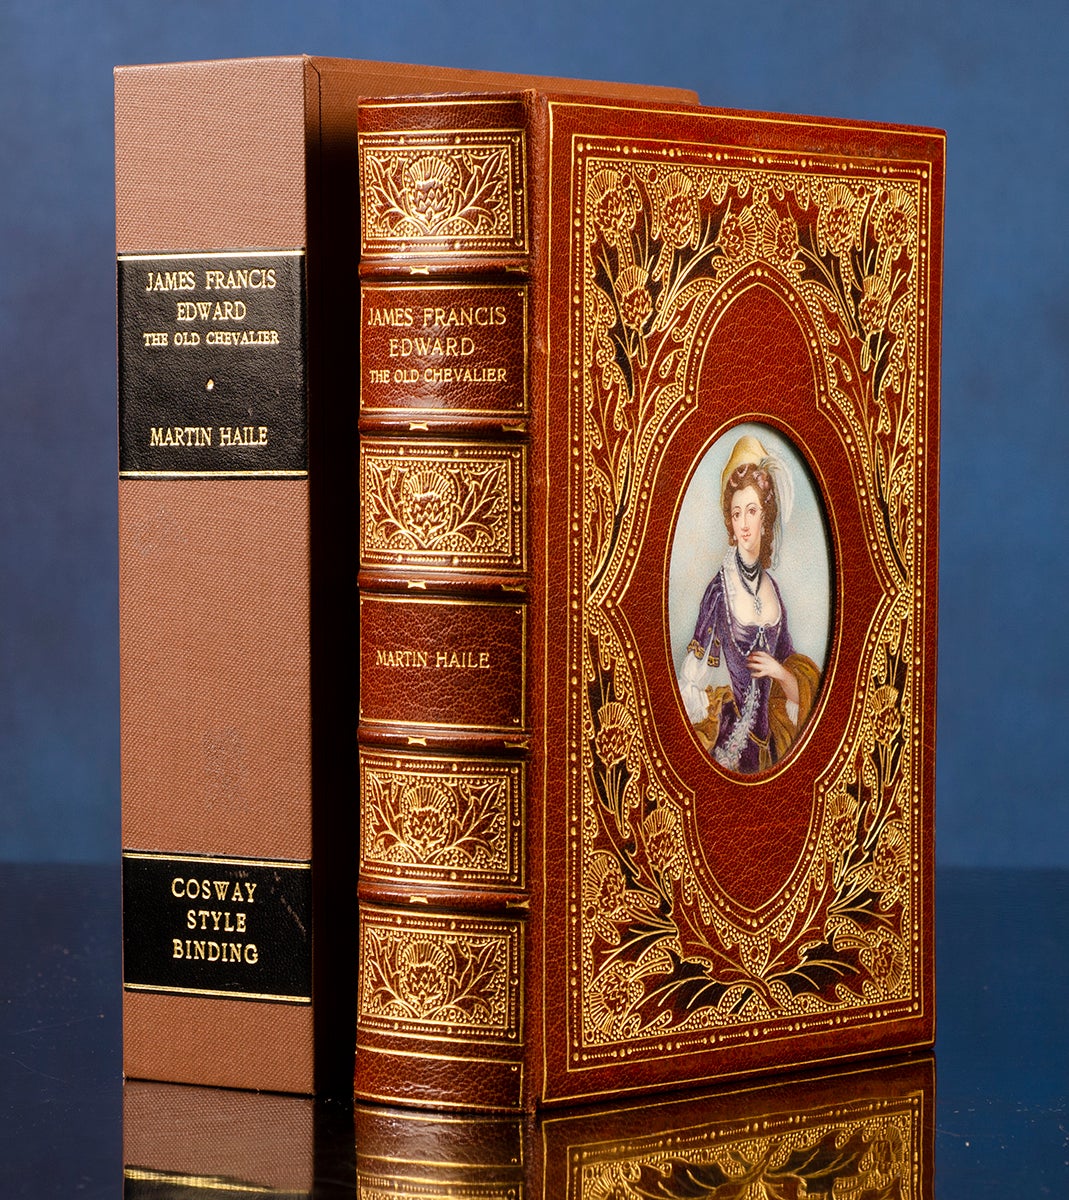 COSWAY-STYLE BINDING; BAYNTUN (RIVIRE), binders; HAILE, Martin - James Francis Edward - the Old Chevalier